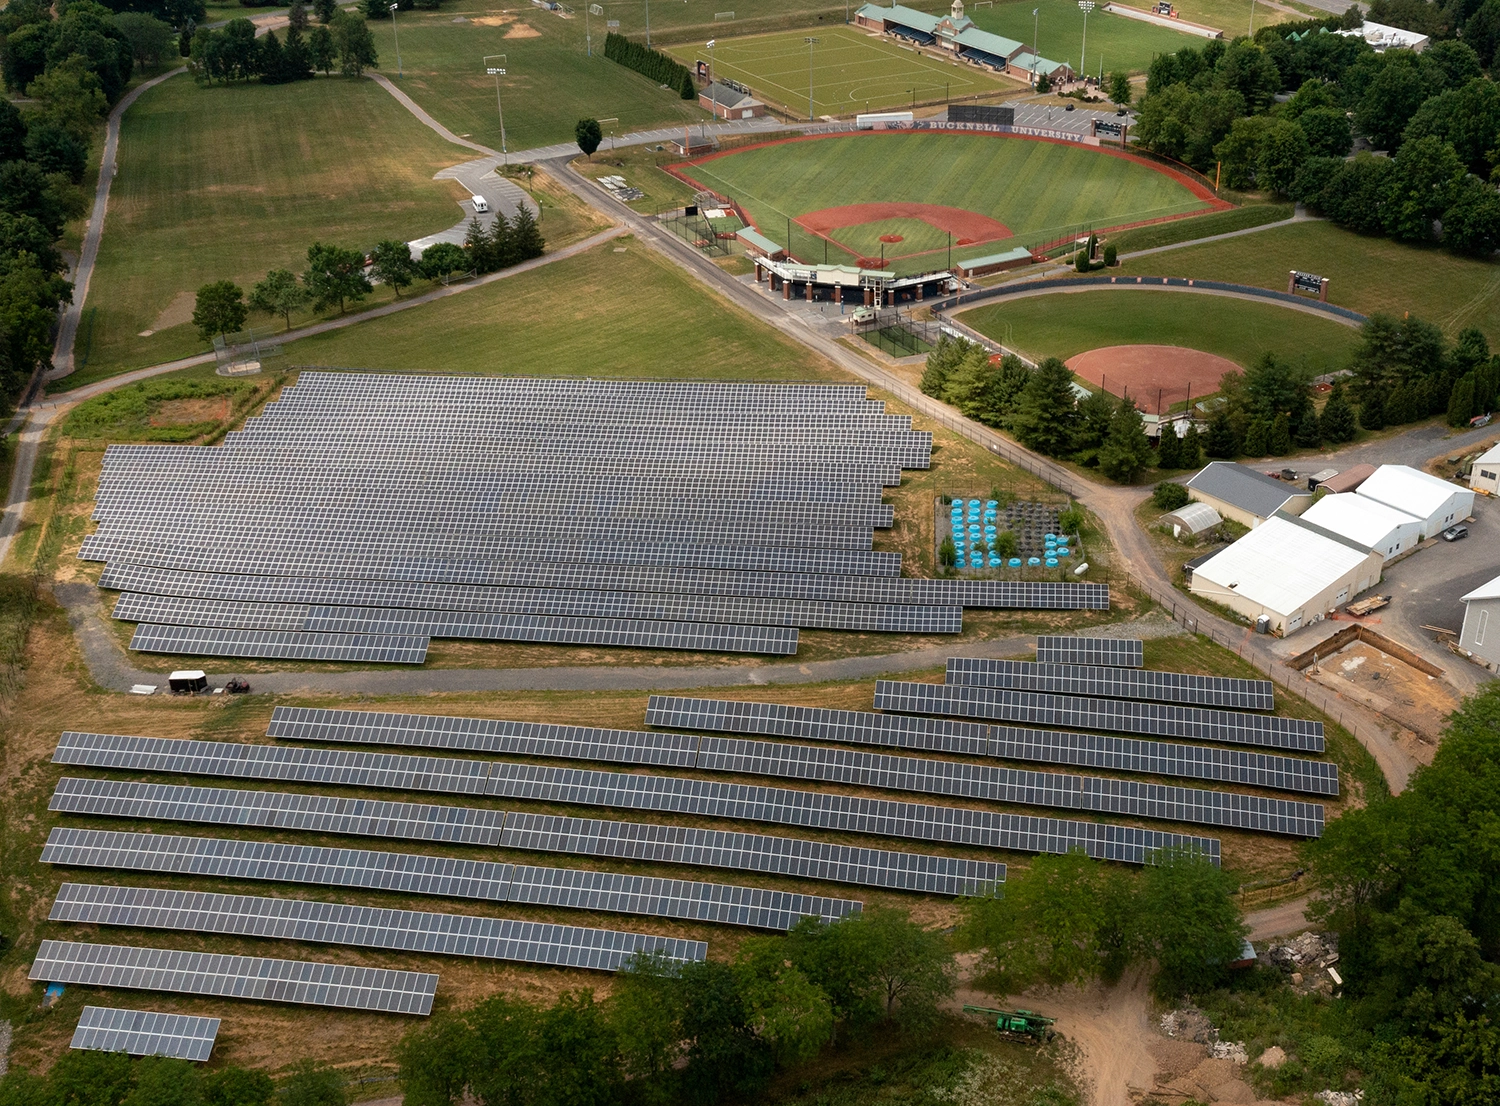 Aerial view of Bucknell's solar array with sports fields in view